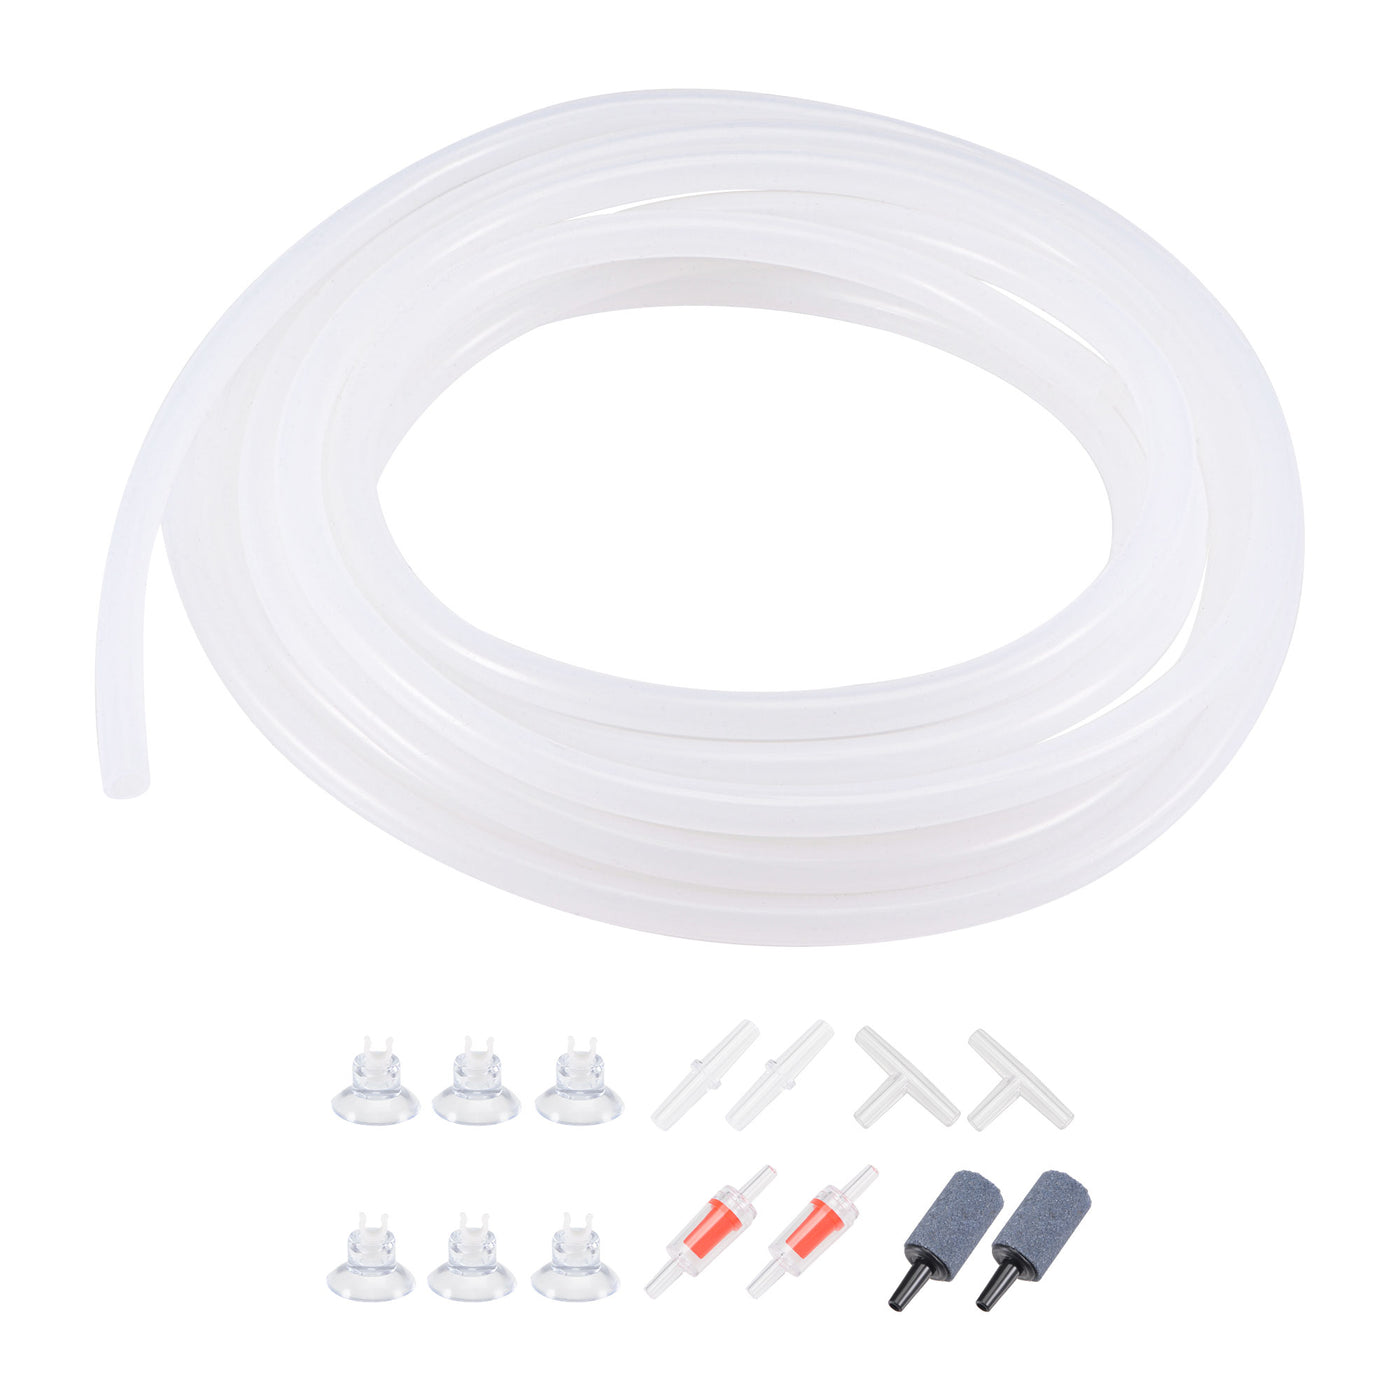 uxcell Uxcell Silicone Tubing 4mm ID 6mm(1/4") OD 5m Aquarium Air Hose with Check Valves, Suction Cups, Connectors, Air Stone